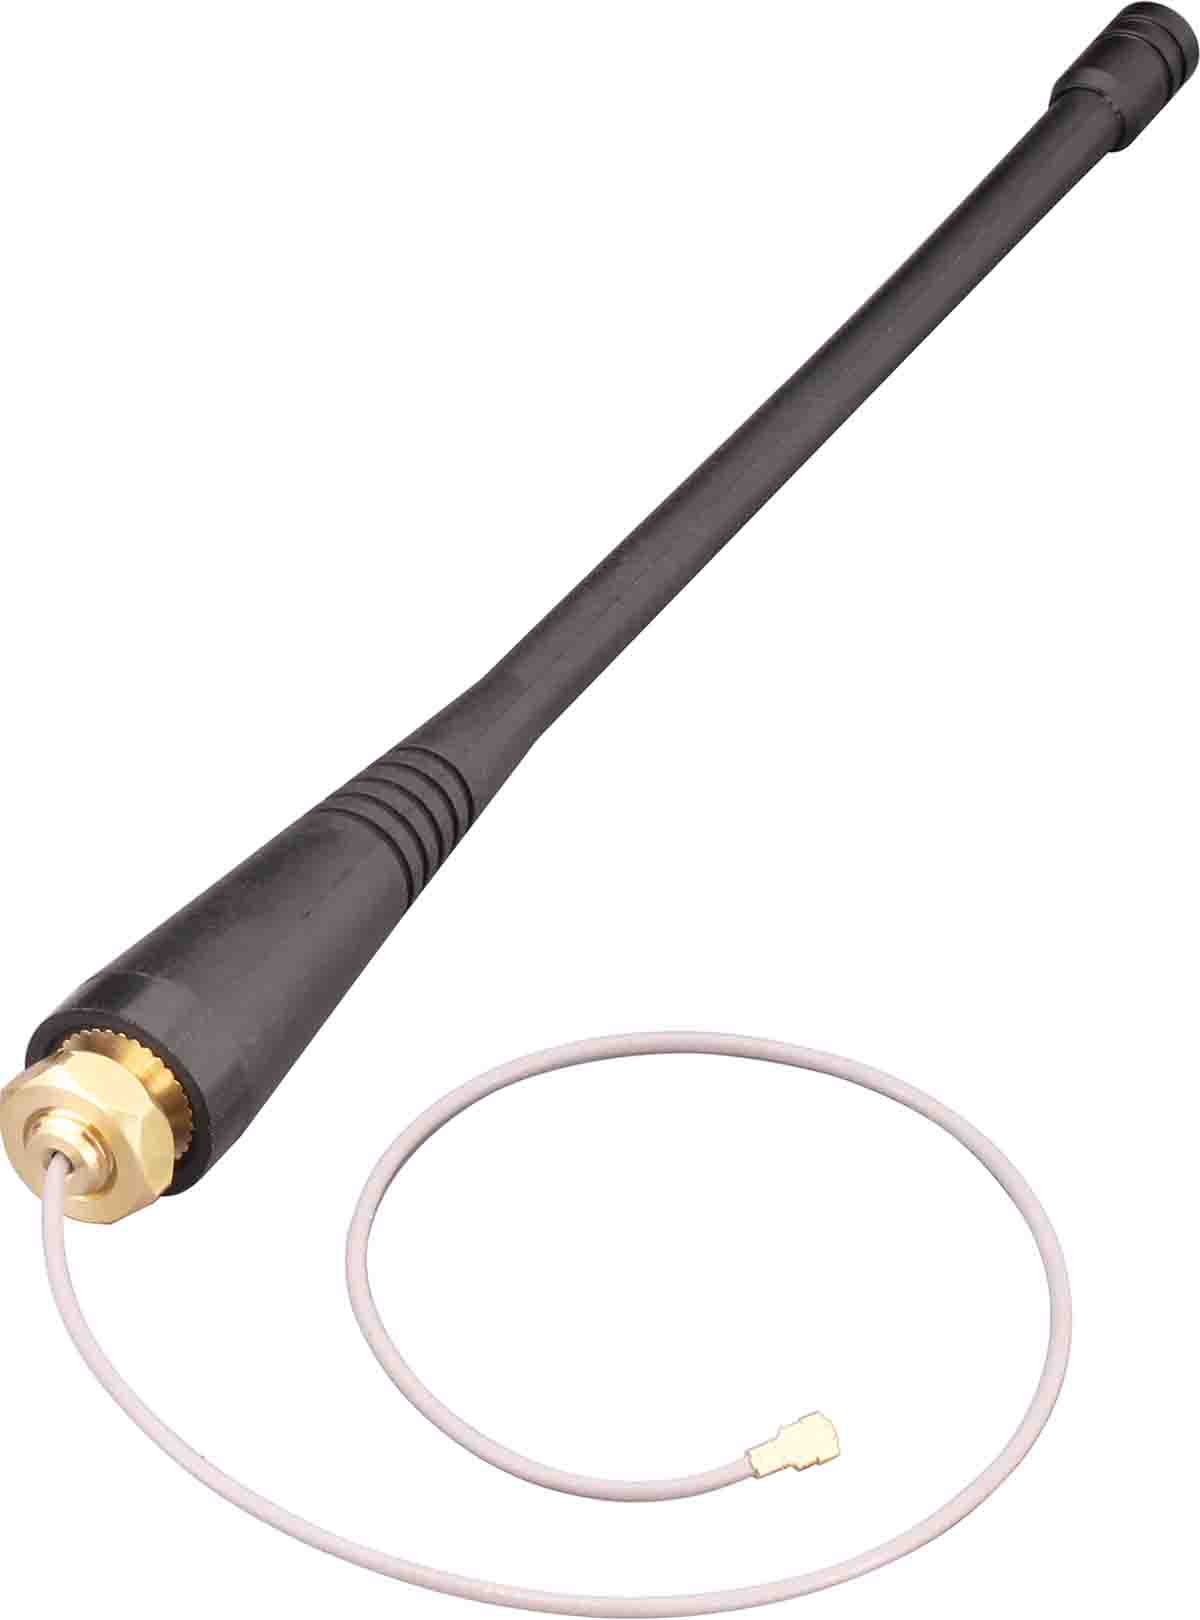 Linx ANT-490-PW-QW-UFL Whip WiFi Antenna with UFL Connector, WiFi